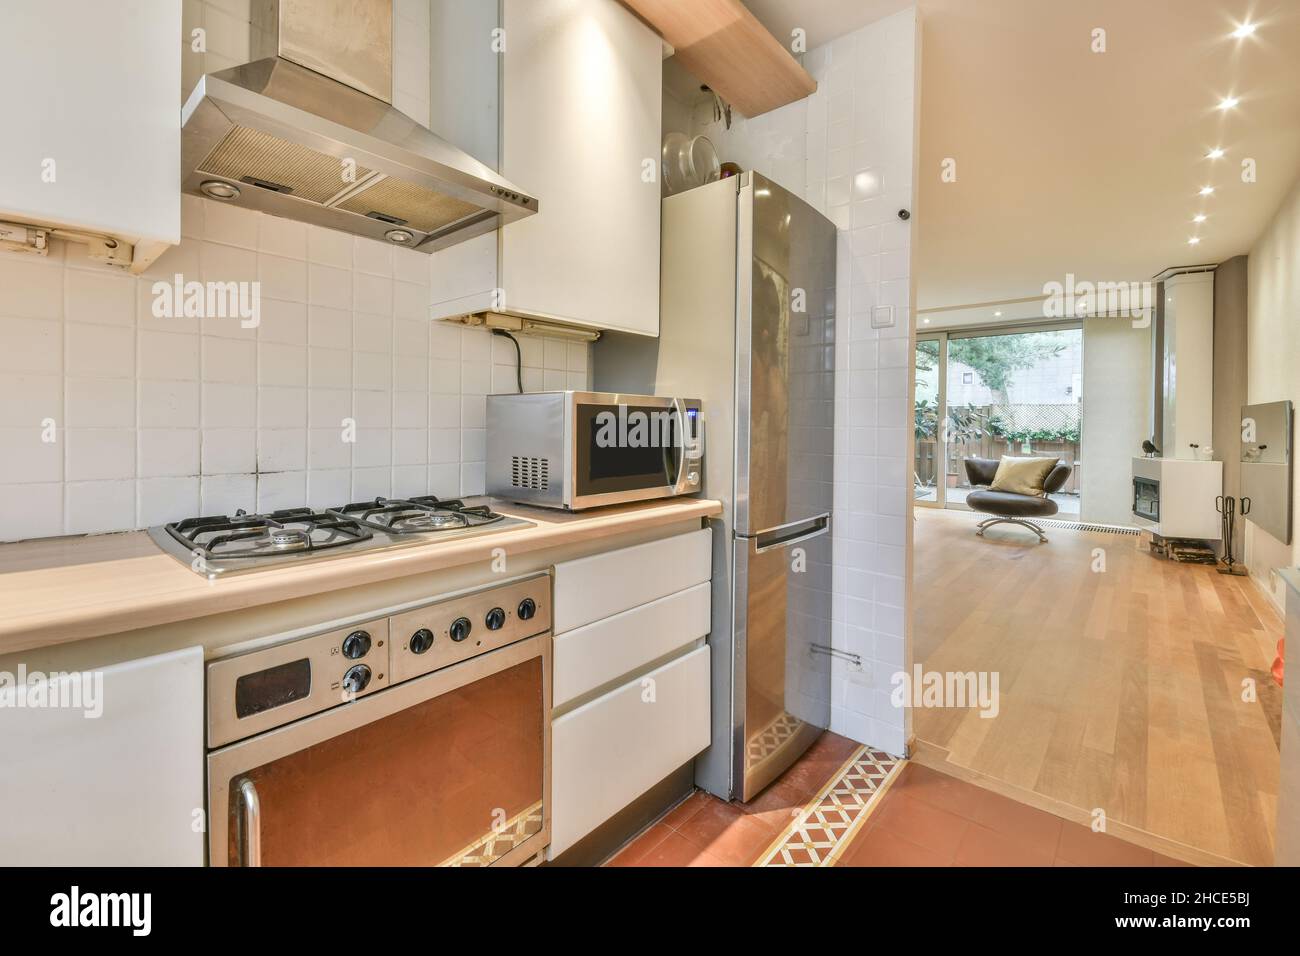 Interior of contemporary kitchen with cabinets and counter opposite fridge and stove with range hood Stock Photo